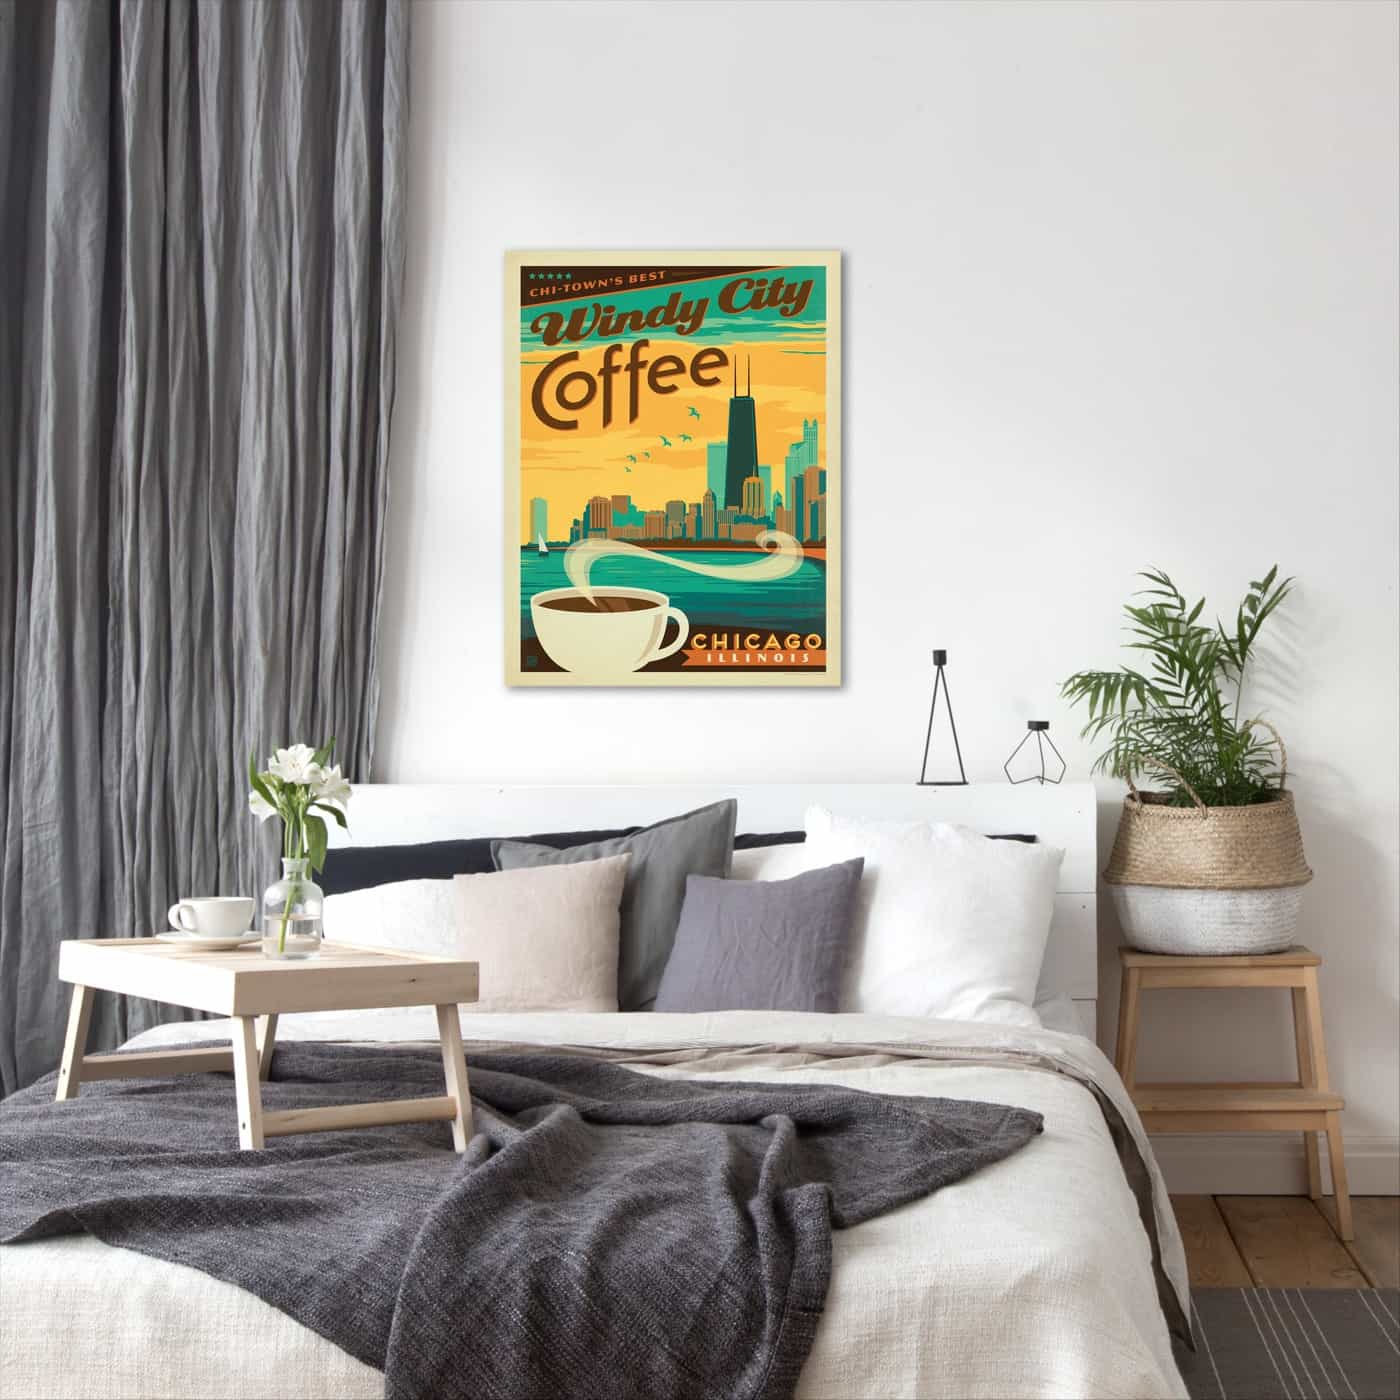 Coff Chicagocoffee by Anderson Design Group Wrapped Canvas - Americanflat - 5" x 7"